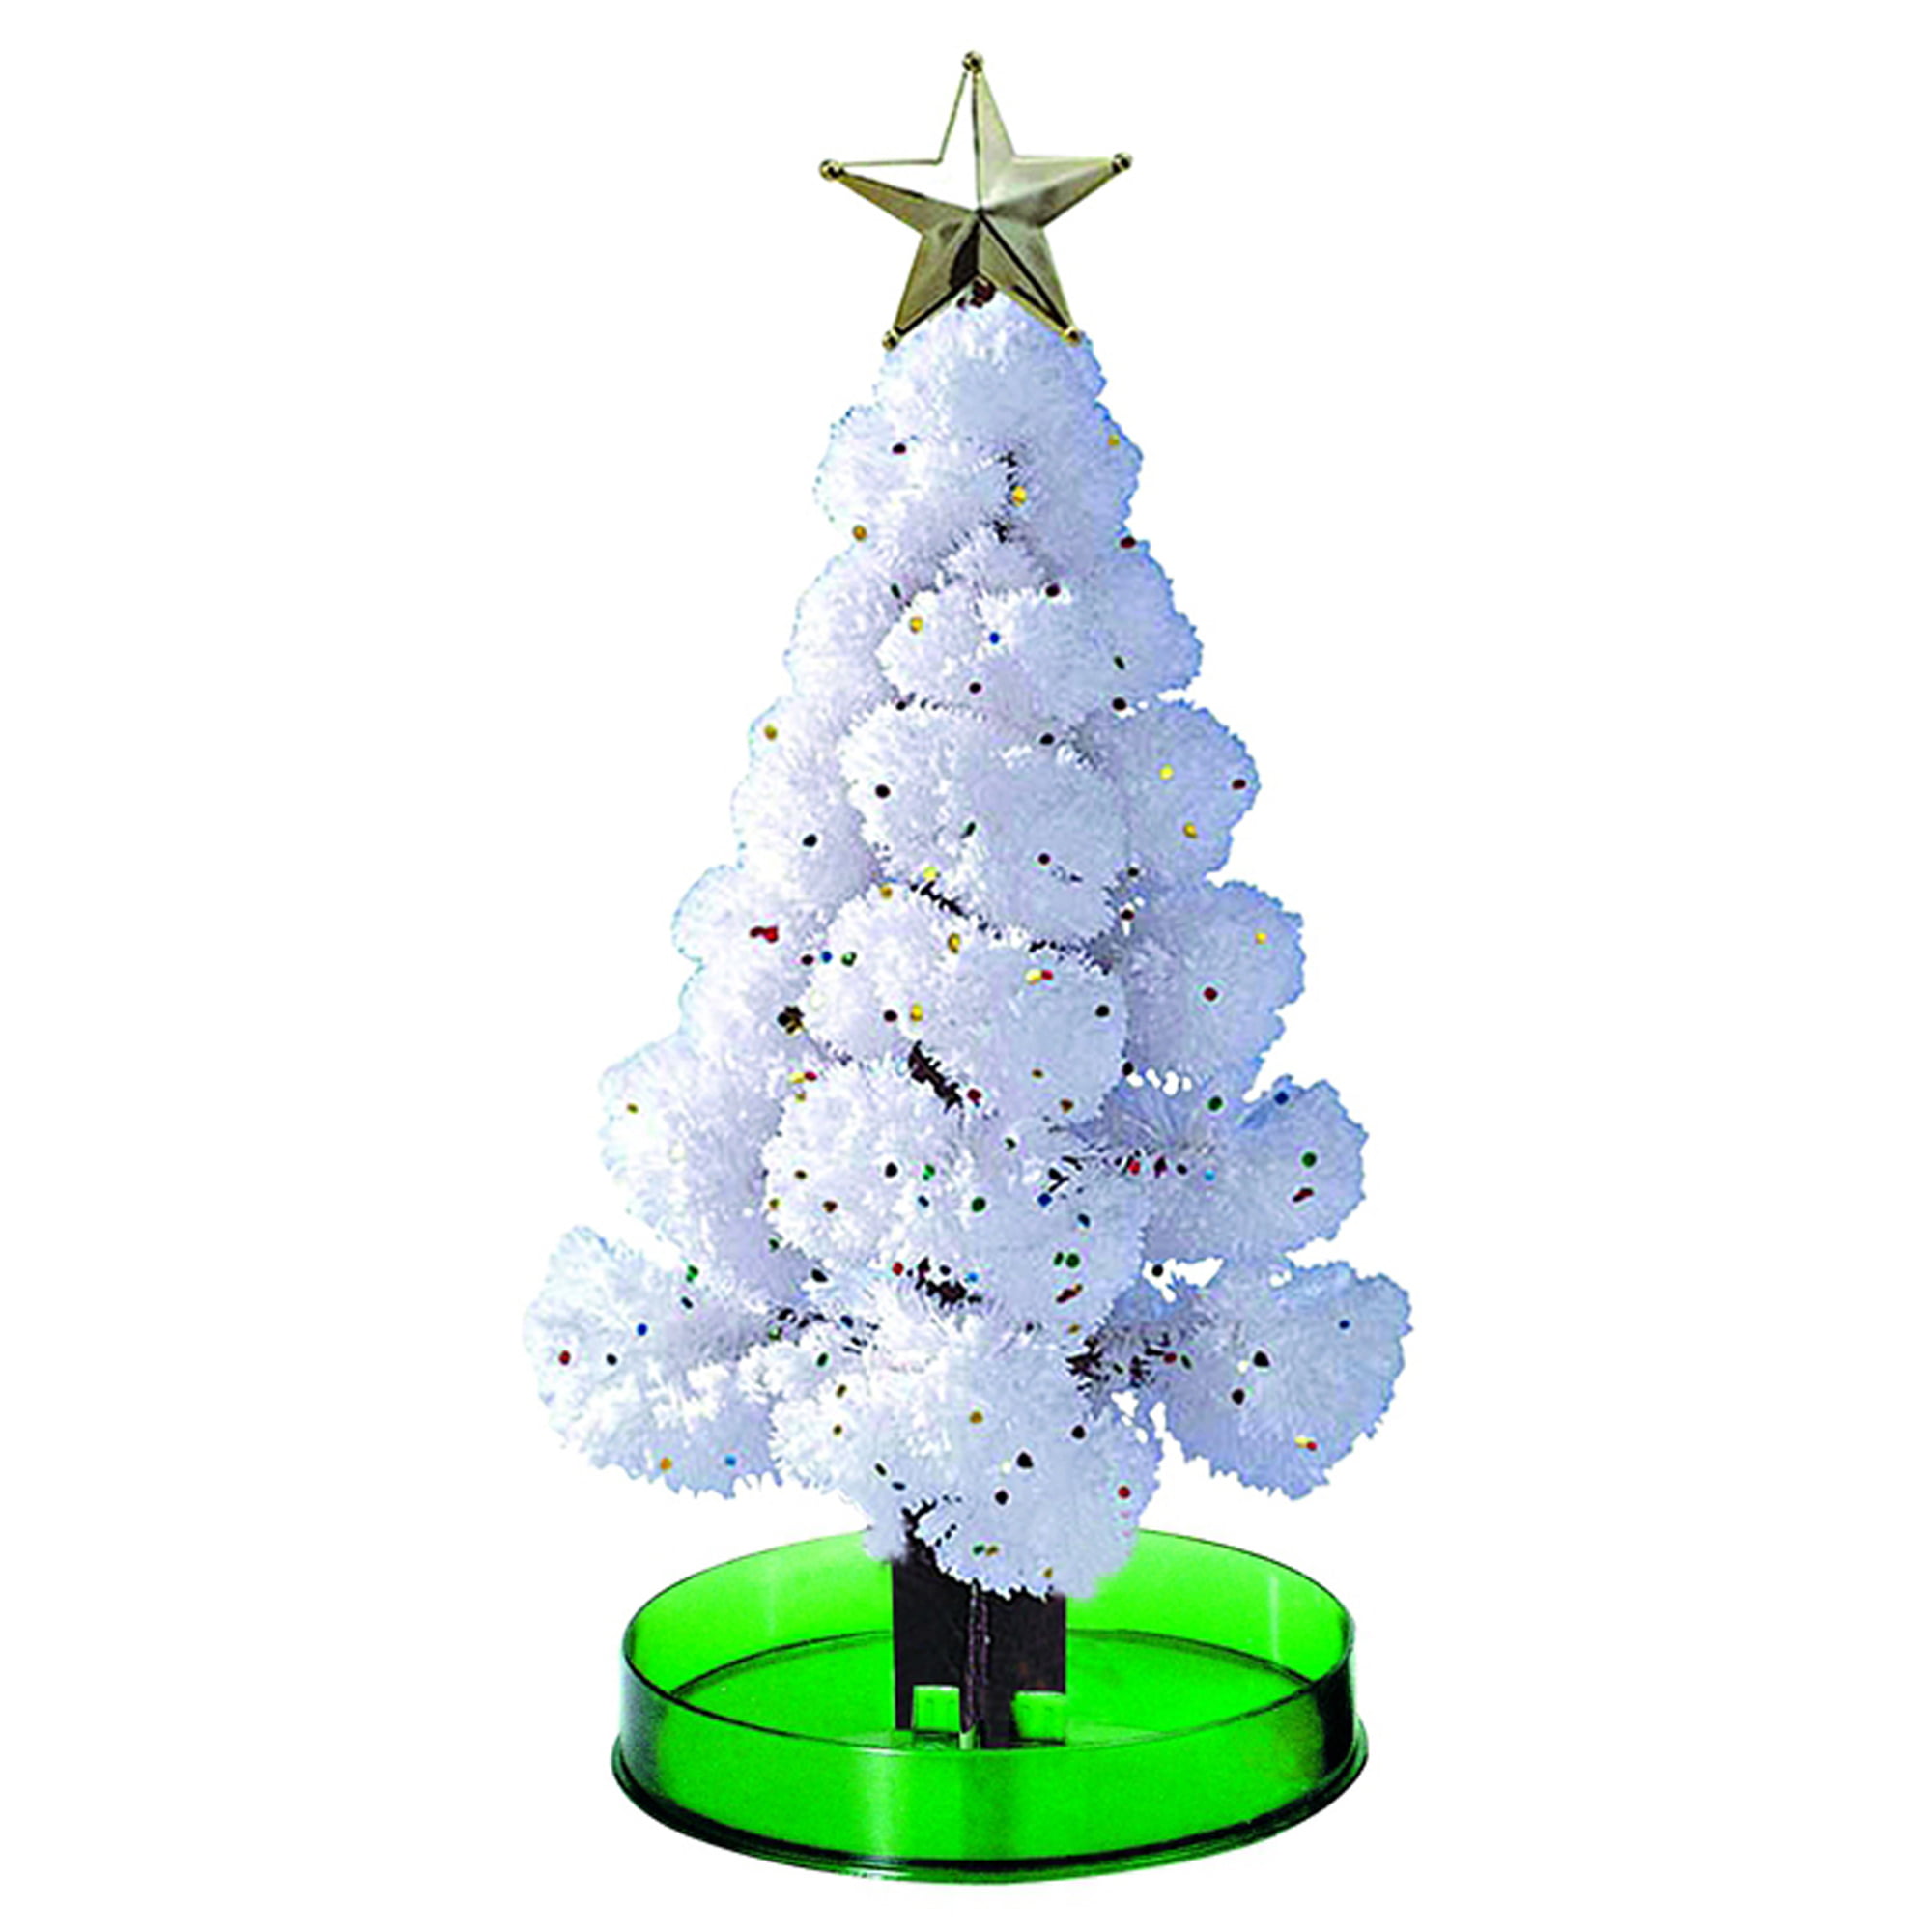 A, 1PC poedkl Magic Growing Christmas Tree Funny Crystal Novelty Gift Toy Presents Novelty Kit for Kids Funny Educational and Party Toys 